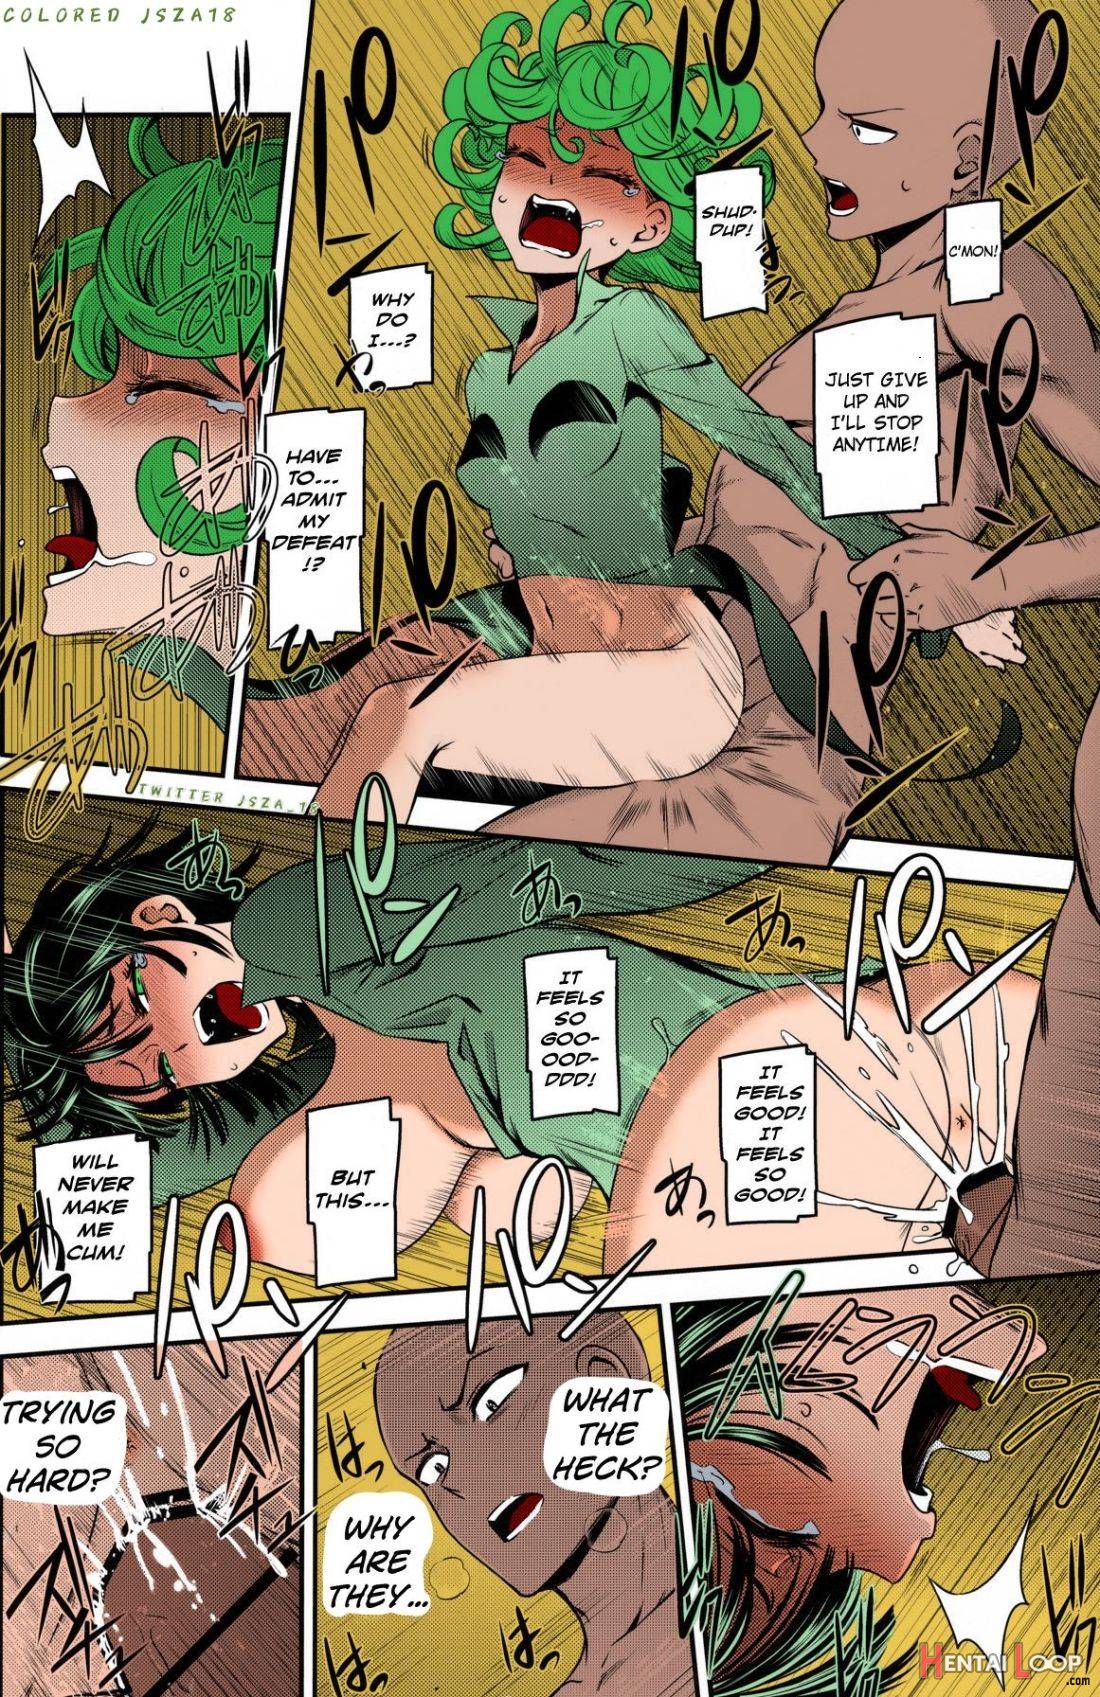 ONE-HURRICANE 4 – Colorized page 21